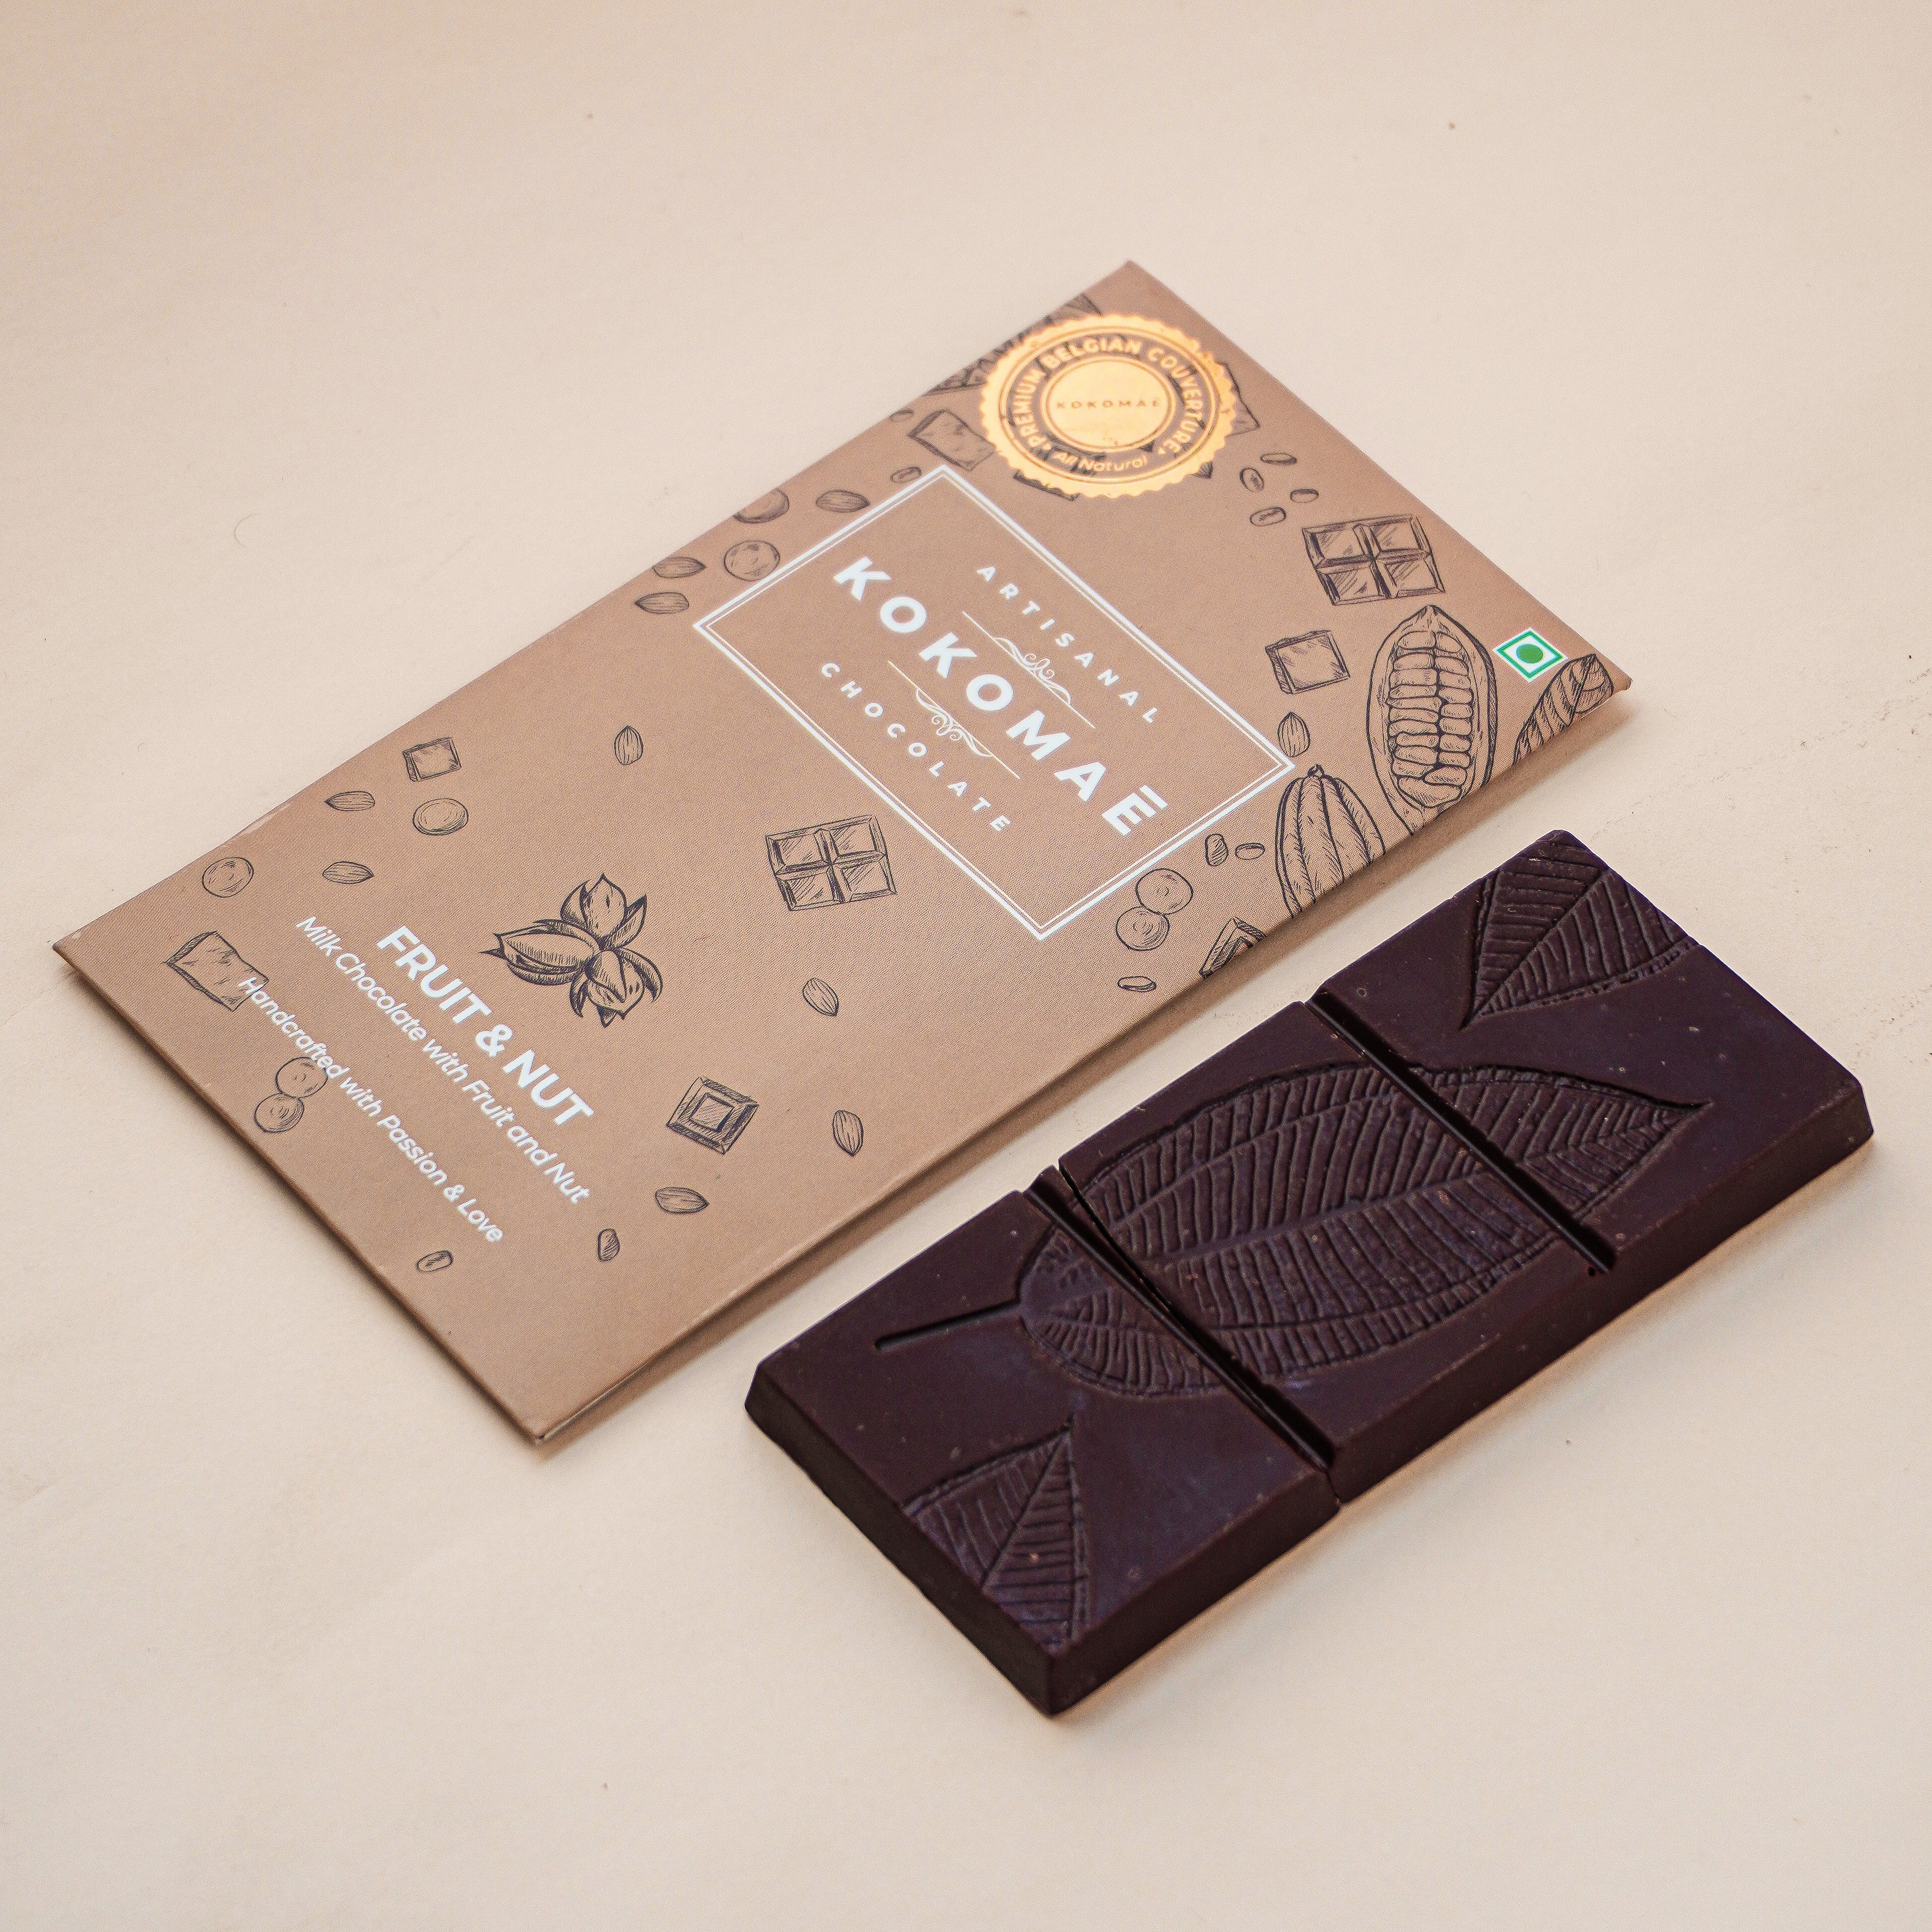 Kokomaē Fruit and Nut Belgian Delight Milk Chocolate Bar with Pure 33.6% Cocoa Butter